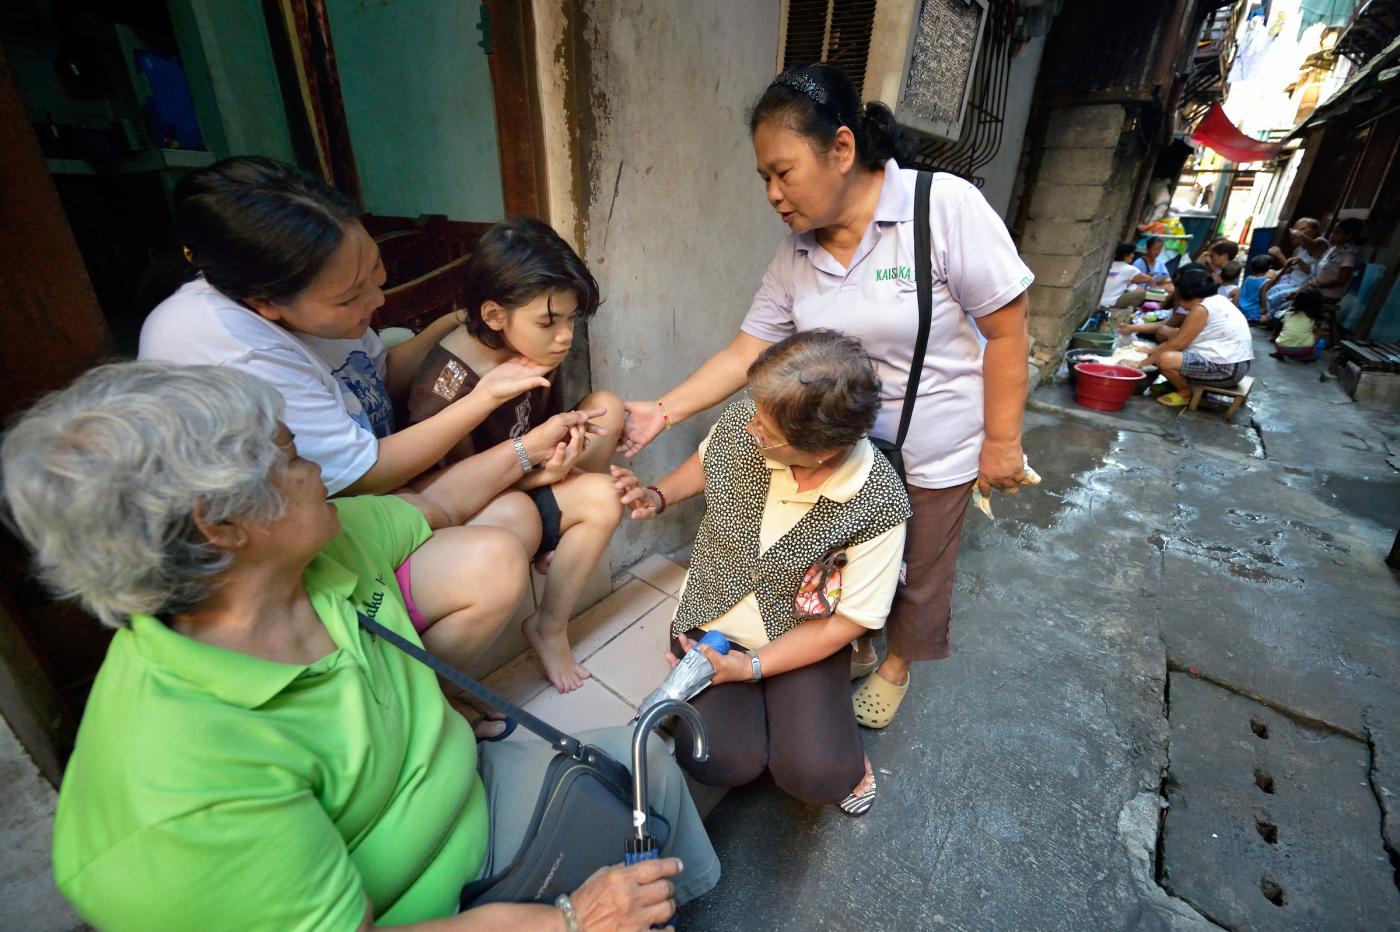 Eileen Peralta and her 12-year old daughter Erin, who has autism, sit on the step of their home in the Malate neighborhood of Manila. They're being visited by other members of Kaisahan ng Magulang at Anak na Maykapansanan (Kaisaka), a mothers' group that carries out community based rehabilitation with families which have members with disabilities.